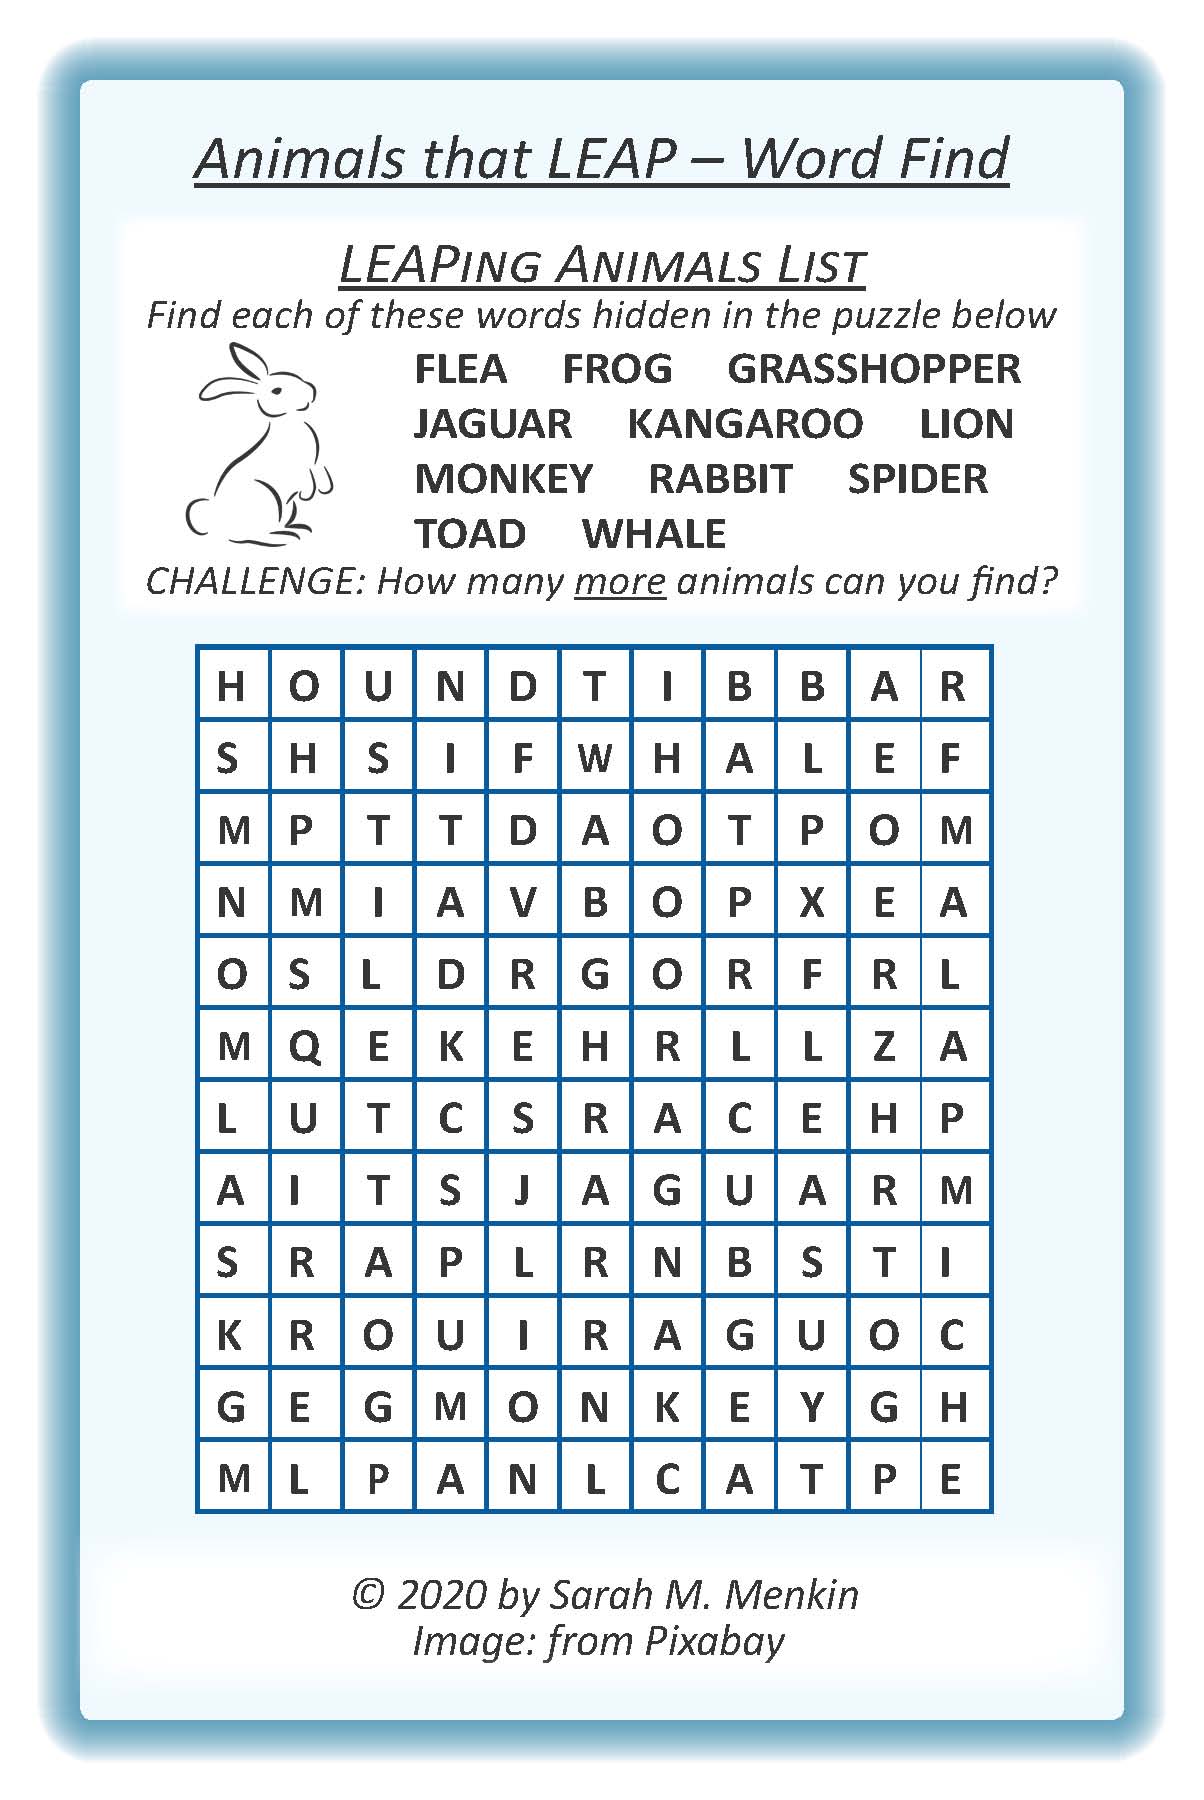 Leaping Creatures Word Find